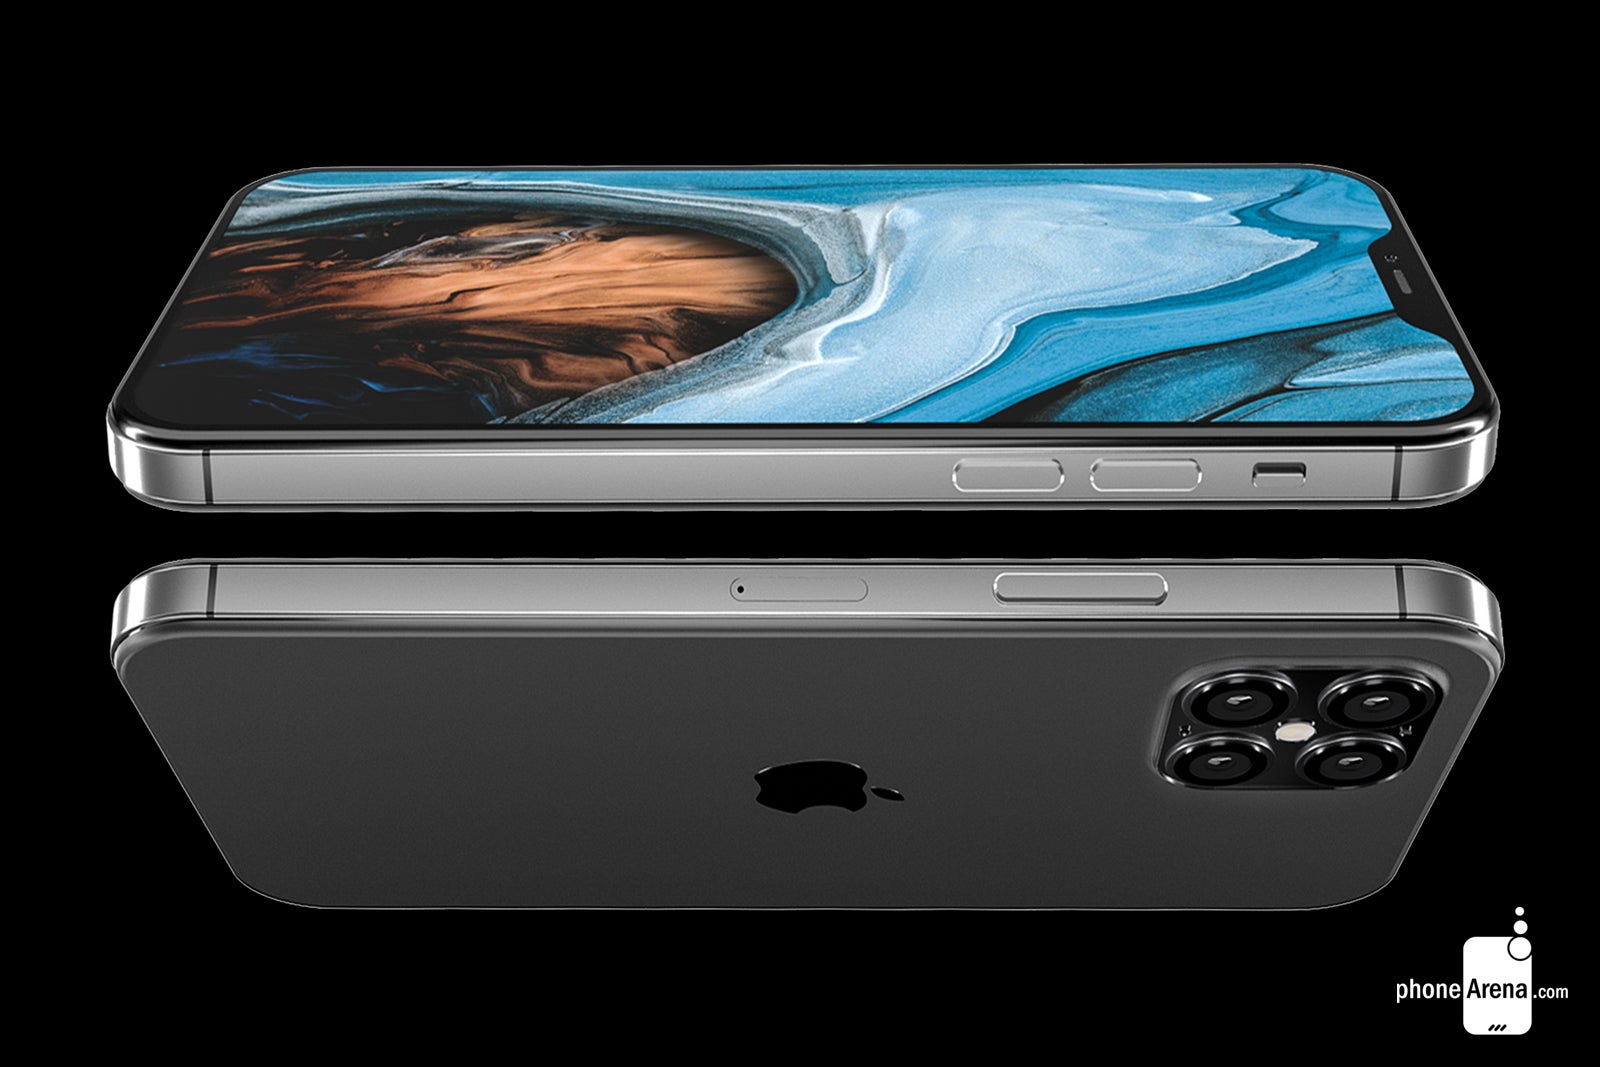 iPhone 12 Pro concept render based on early information - Apple&#039;s 2020 iPhones could introduce this big camera upgrade